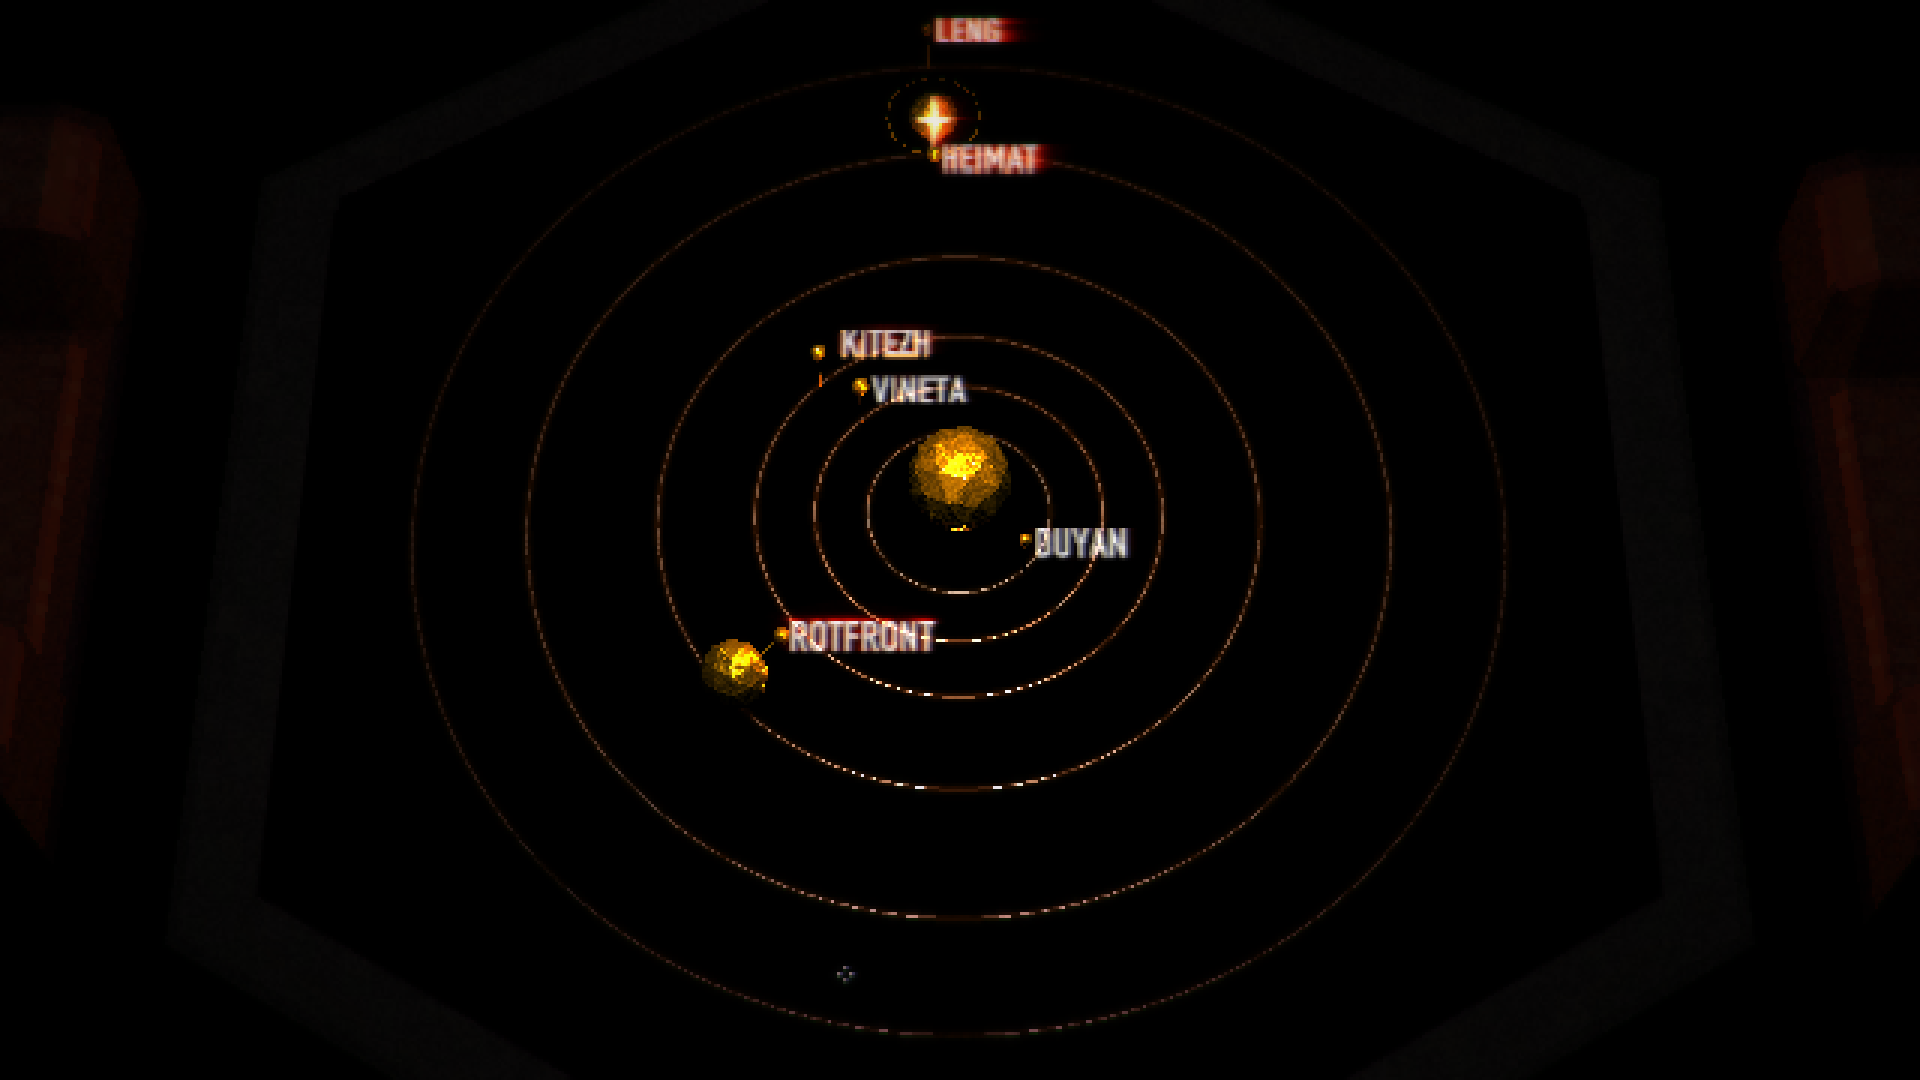 The star chart in Signalis